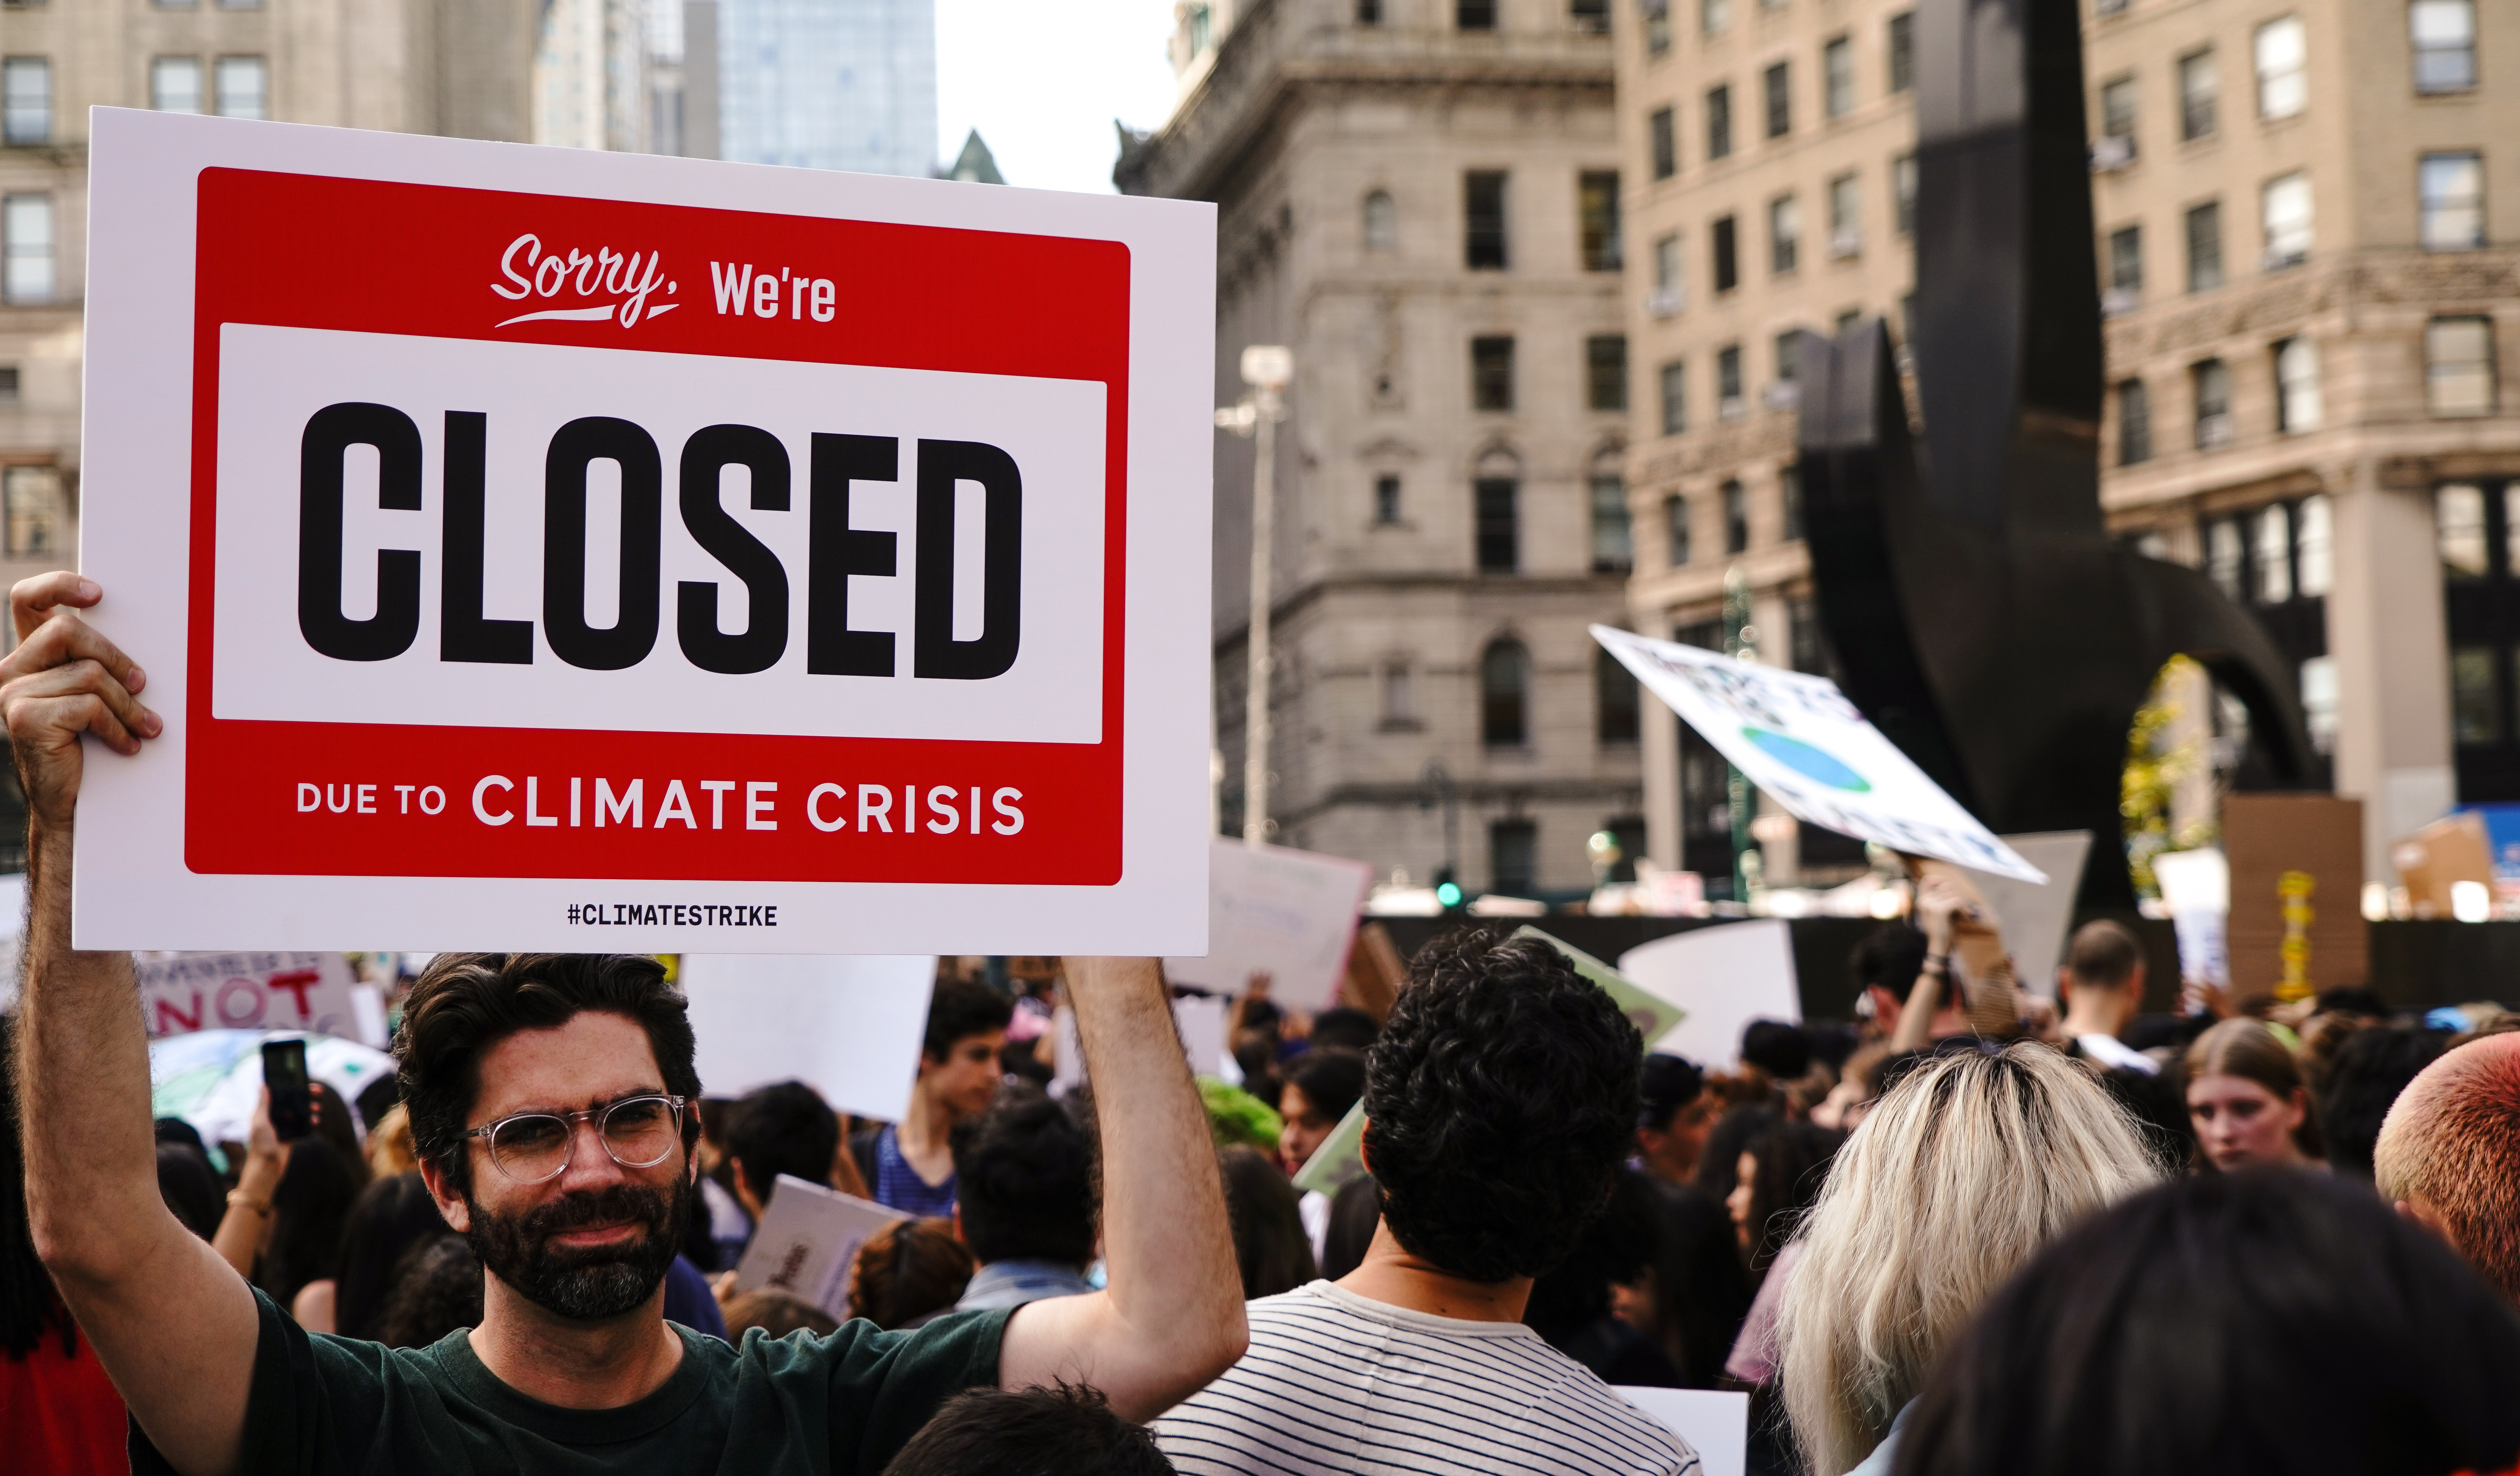 a young man in a crowd holds up a sign reading "sorry we're closed due to the climate crisis"